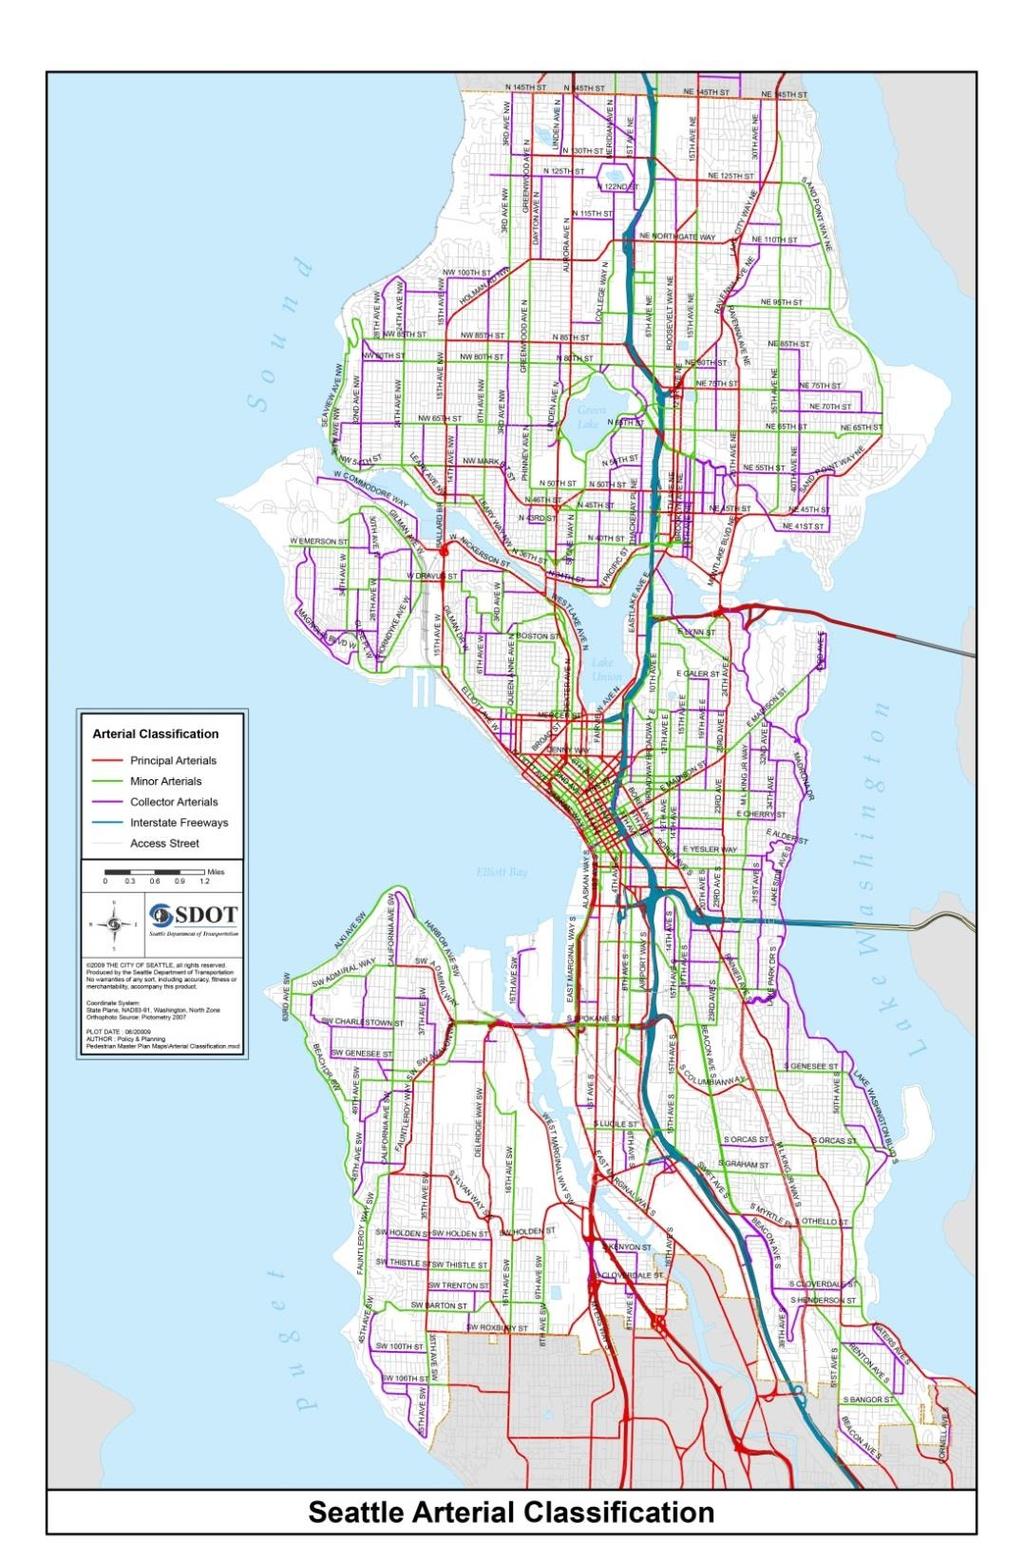 Seattle s street system System is constrained by geography (water, hills)